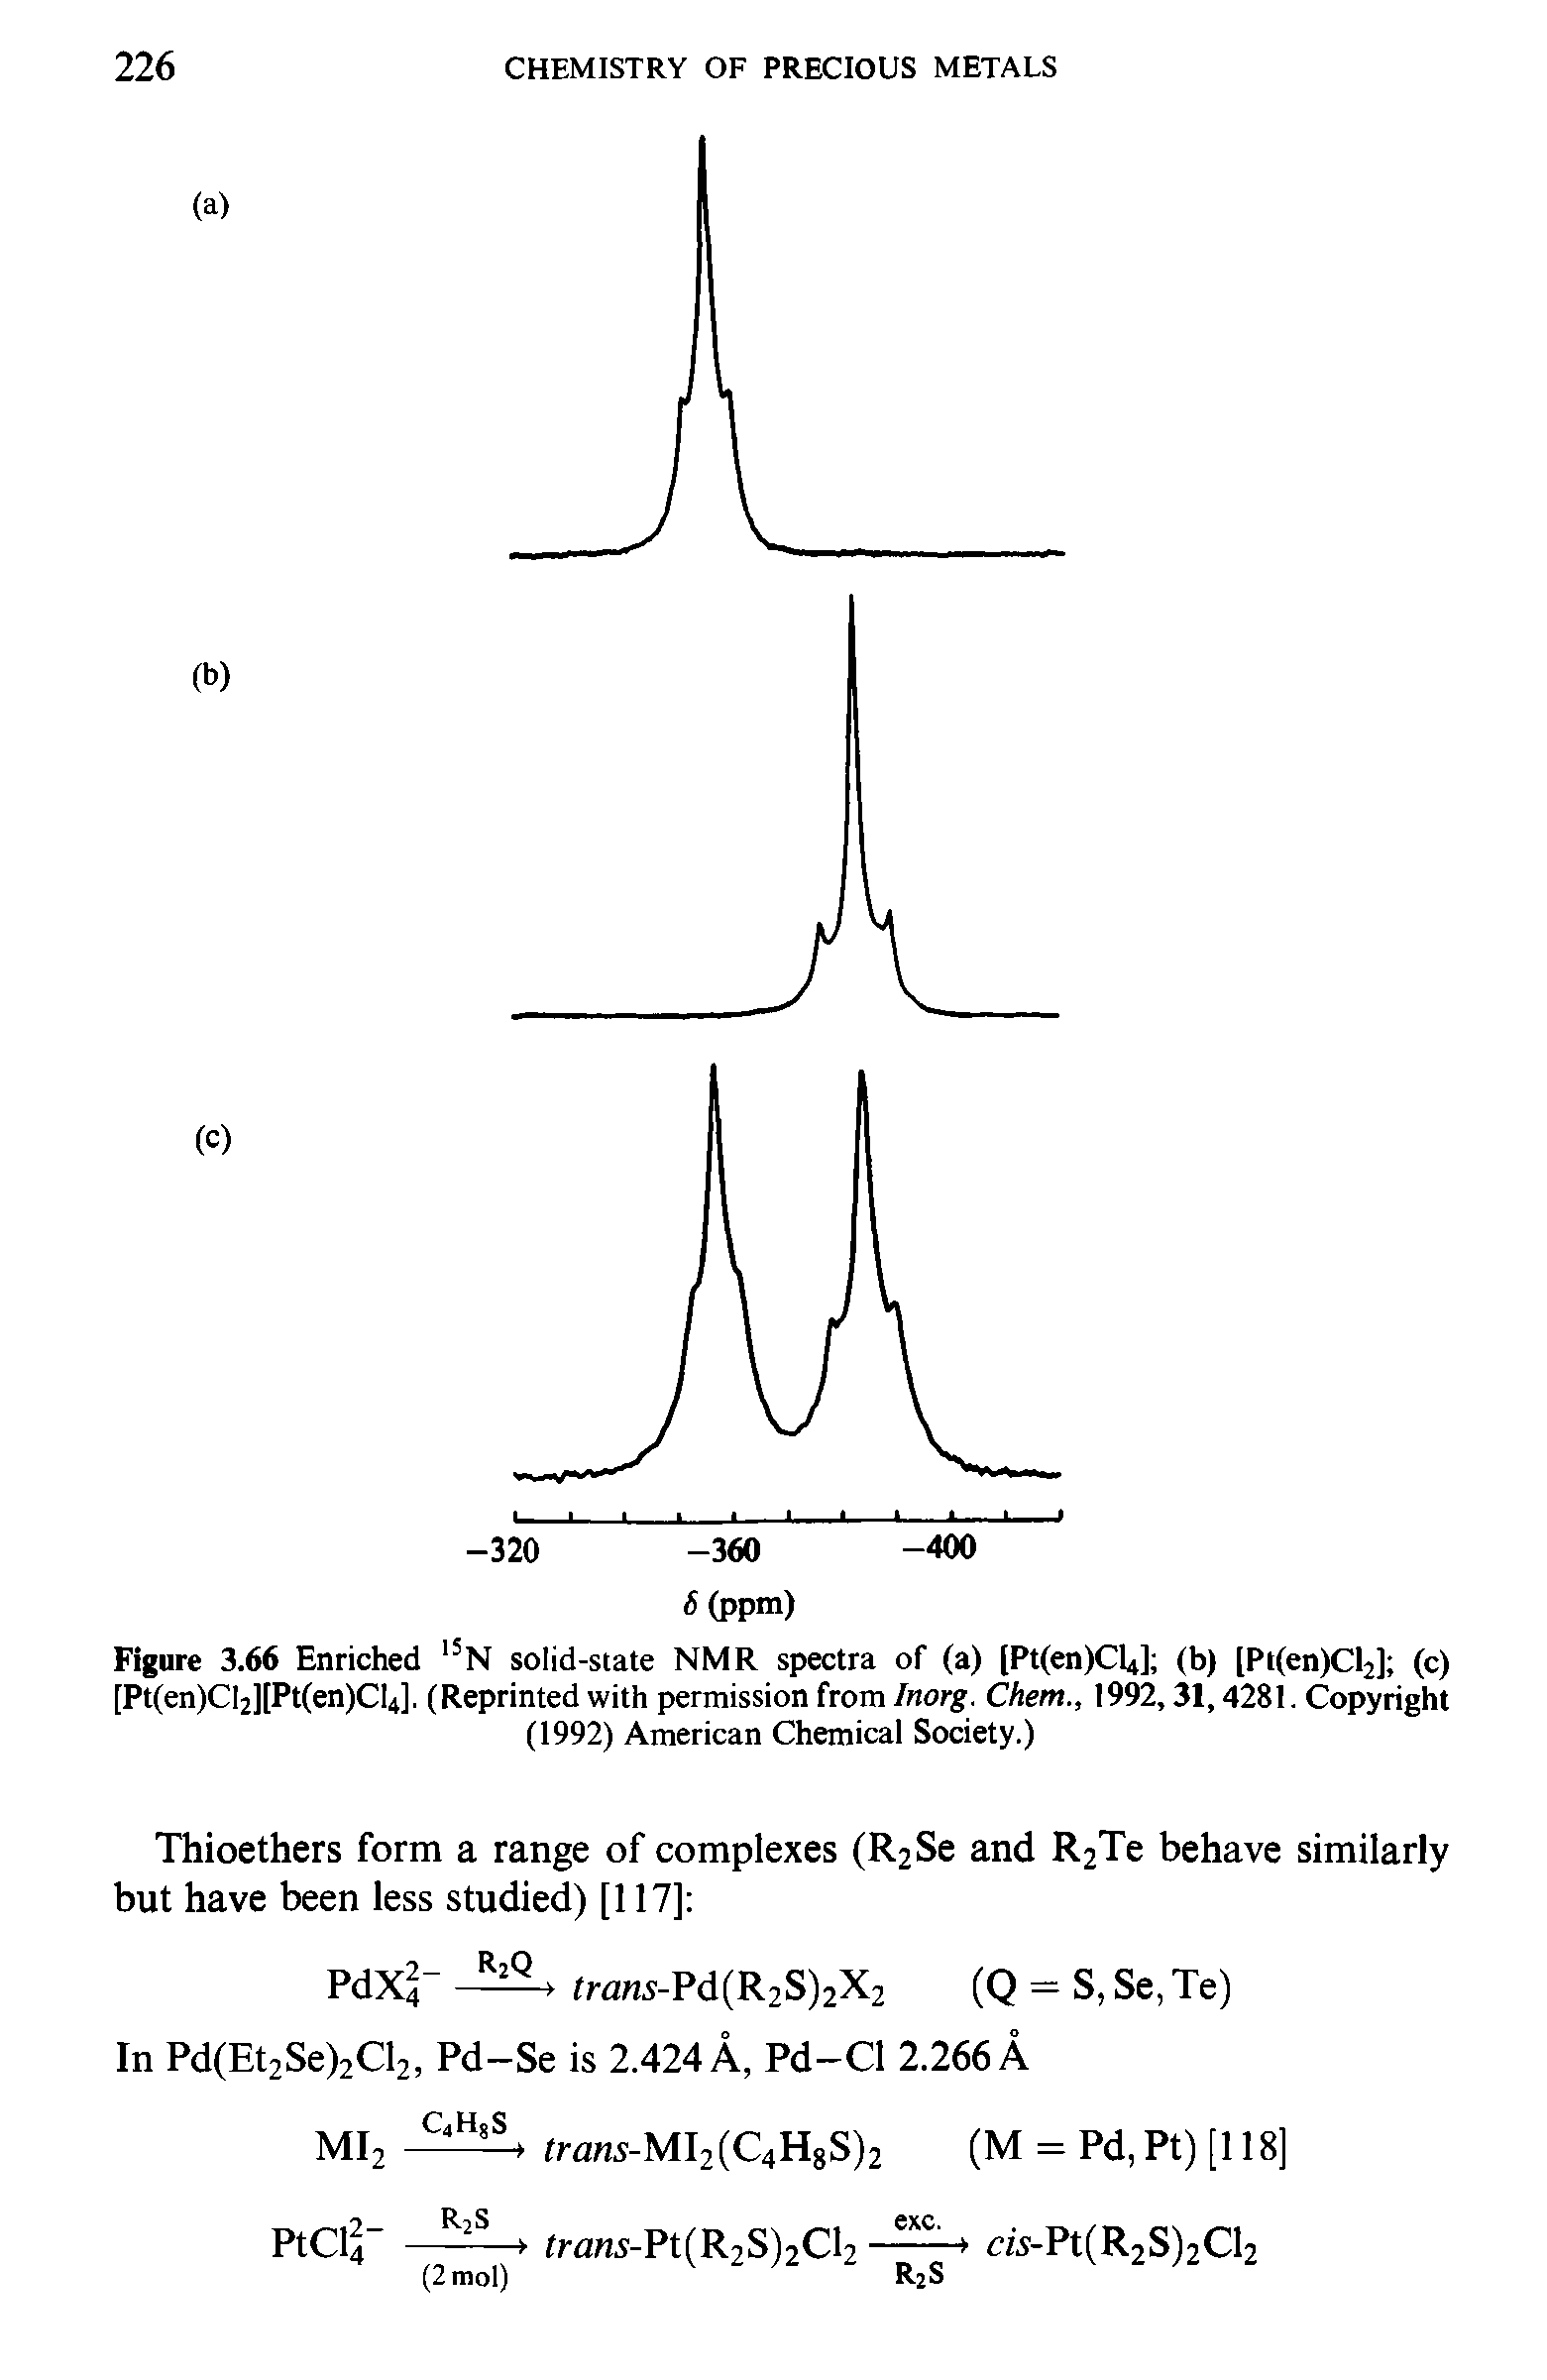 Figure 3.66 Enriched 1SN solid-state NMR spectra of (a) [Pt(en)Cl4] (b) [Pt(en)Cl2] (c) [Pt(en)Cl2][Pt(en)Cl4]. (Reprinted with permission from Inorg. Chem., 1992,31,4281. Copyright (1992) American Chemical Society.)...